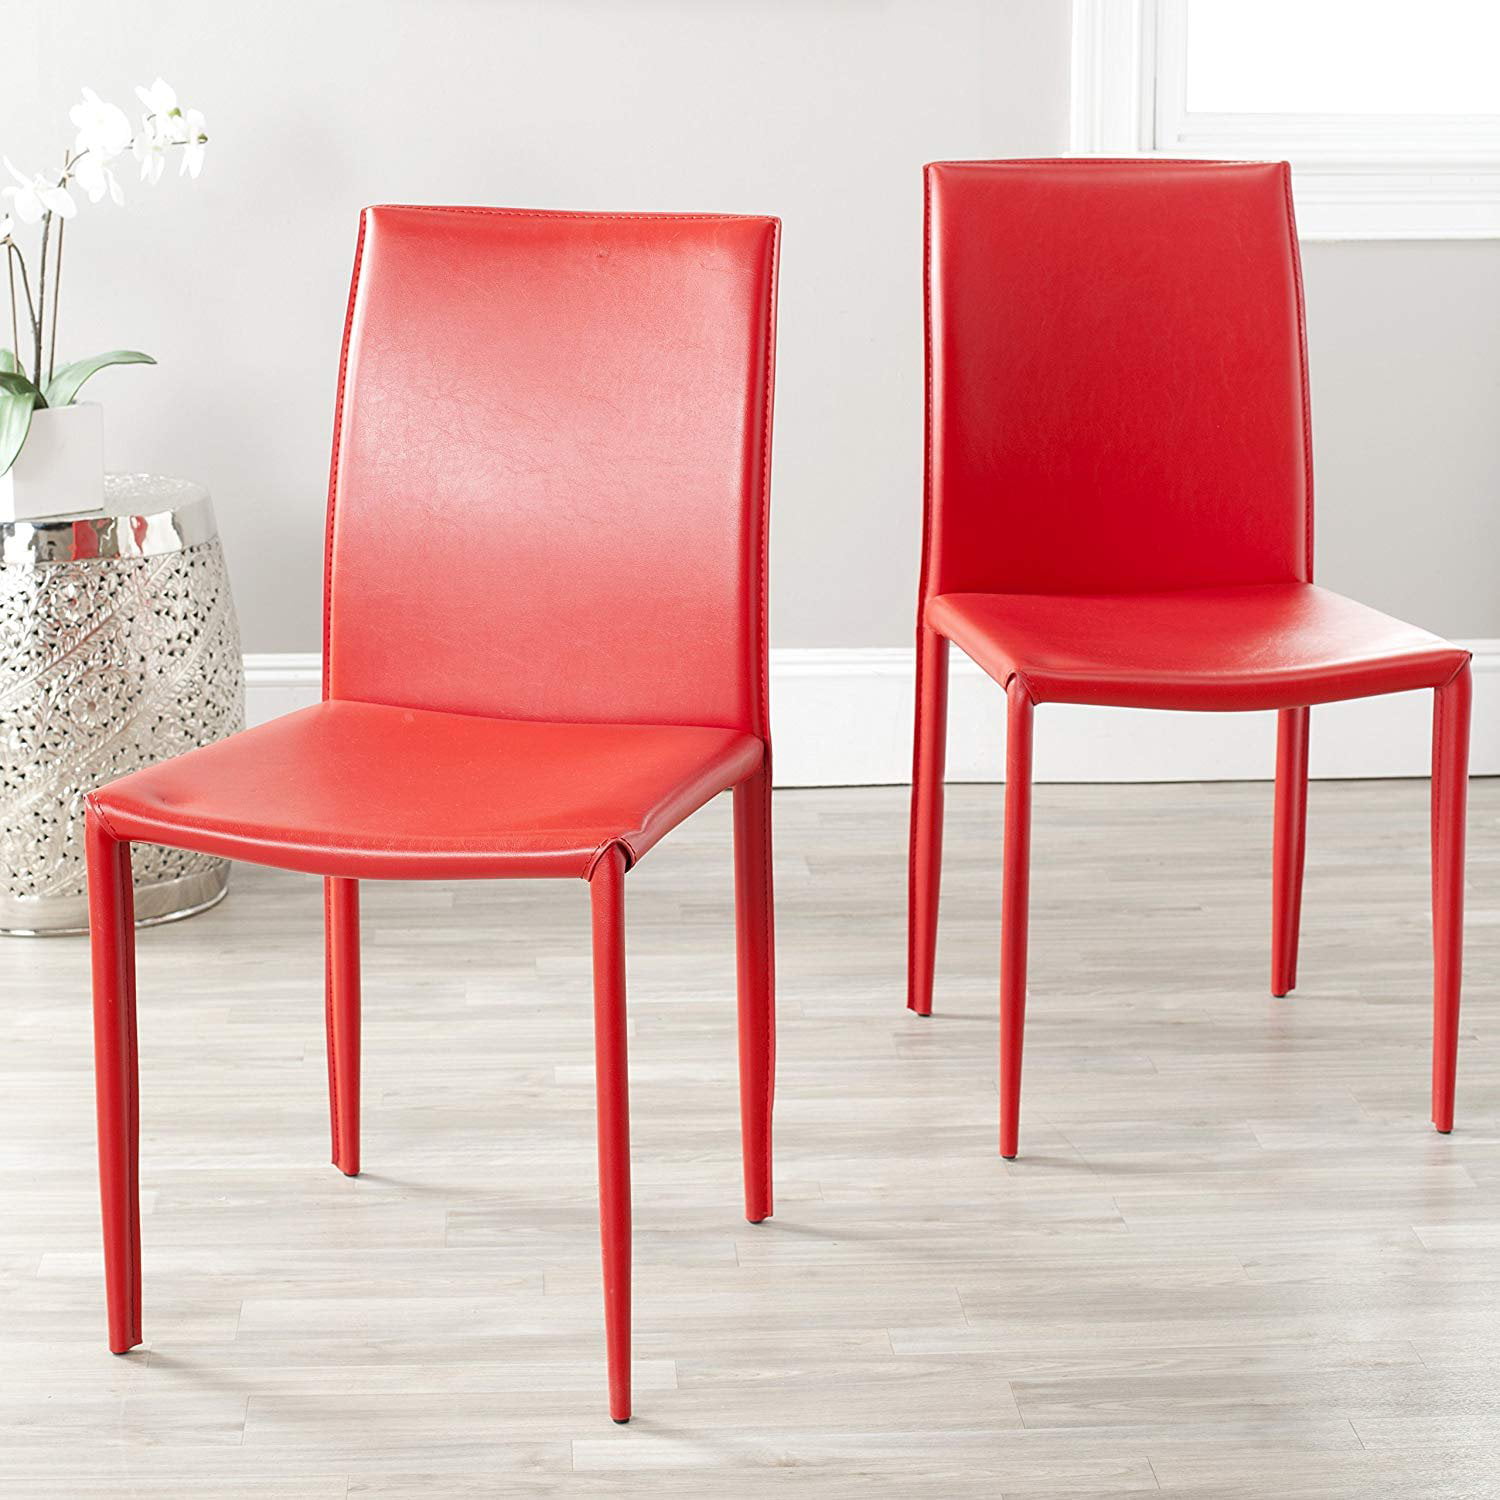 Safavieh Home Collection Karna Modern Red Dining Chair (Set of 2